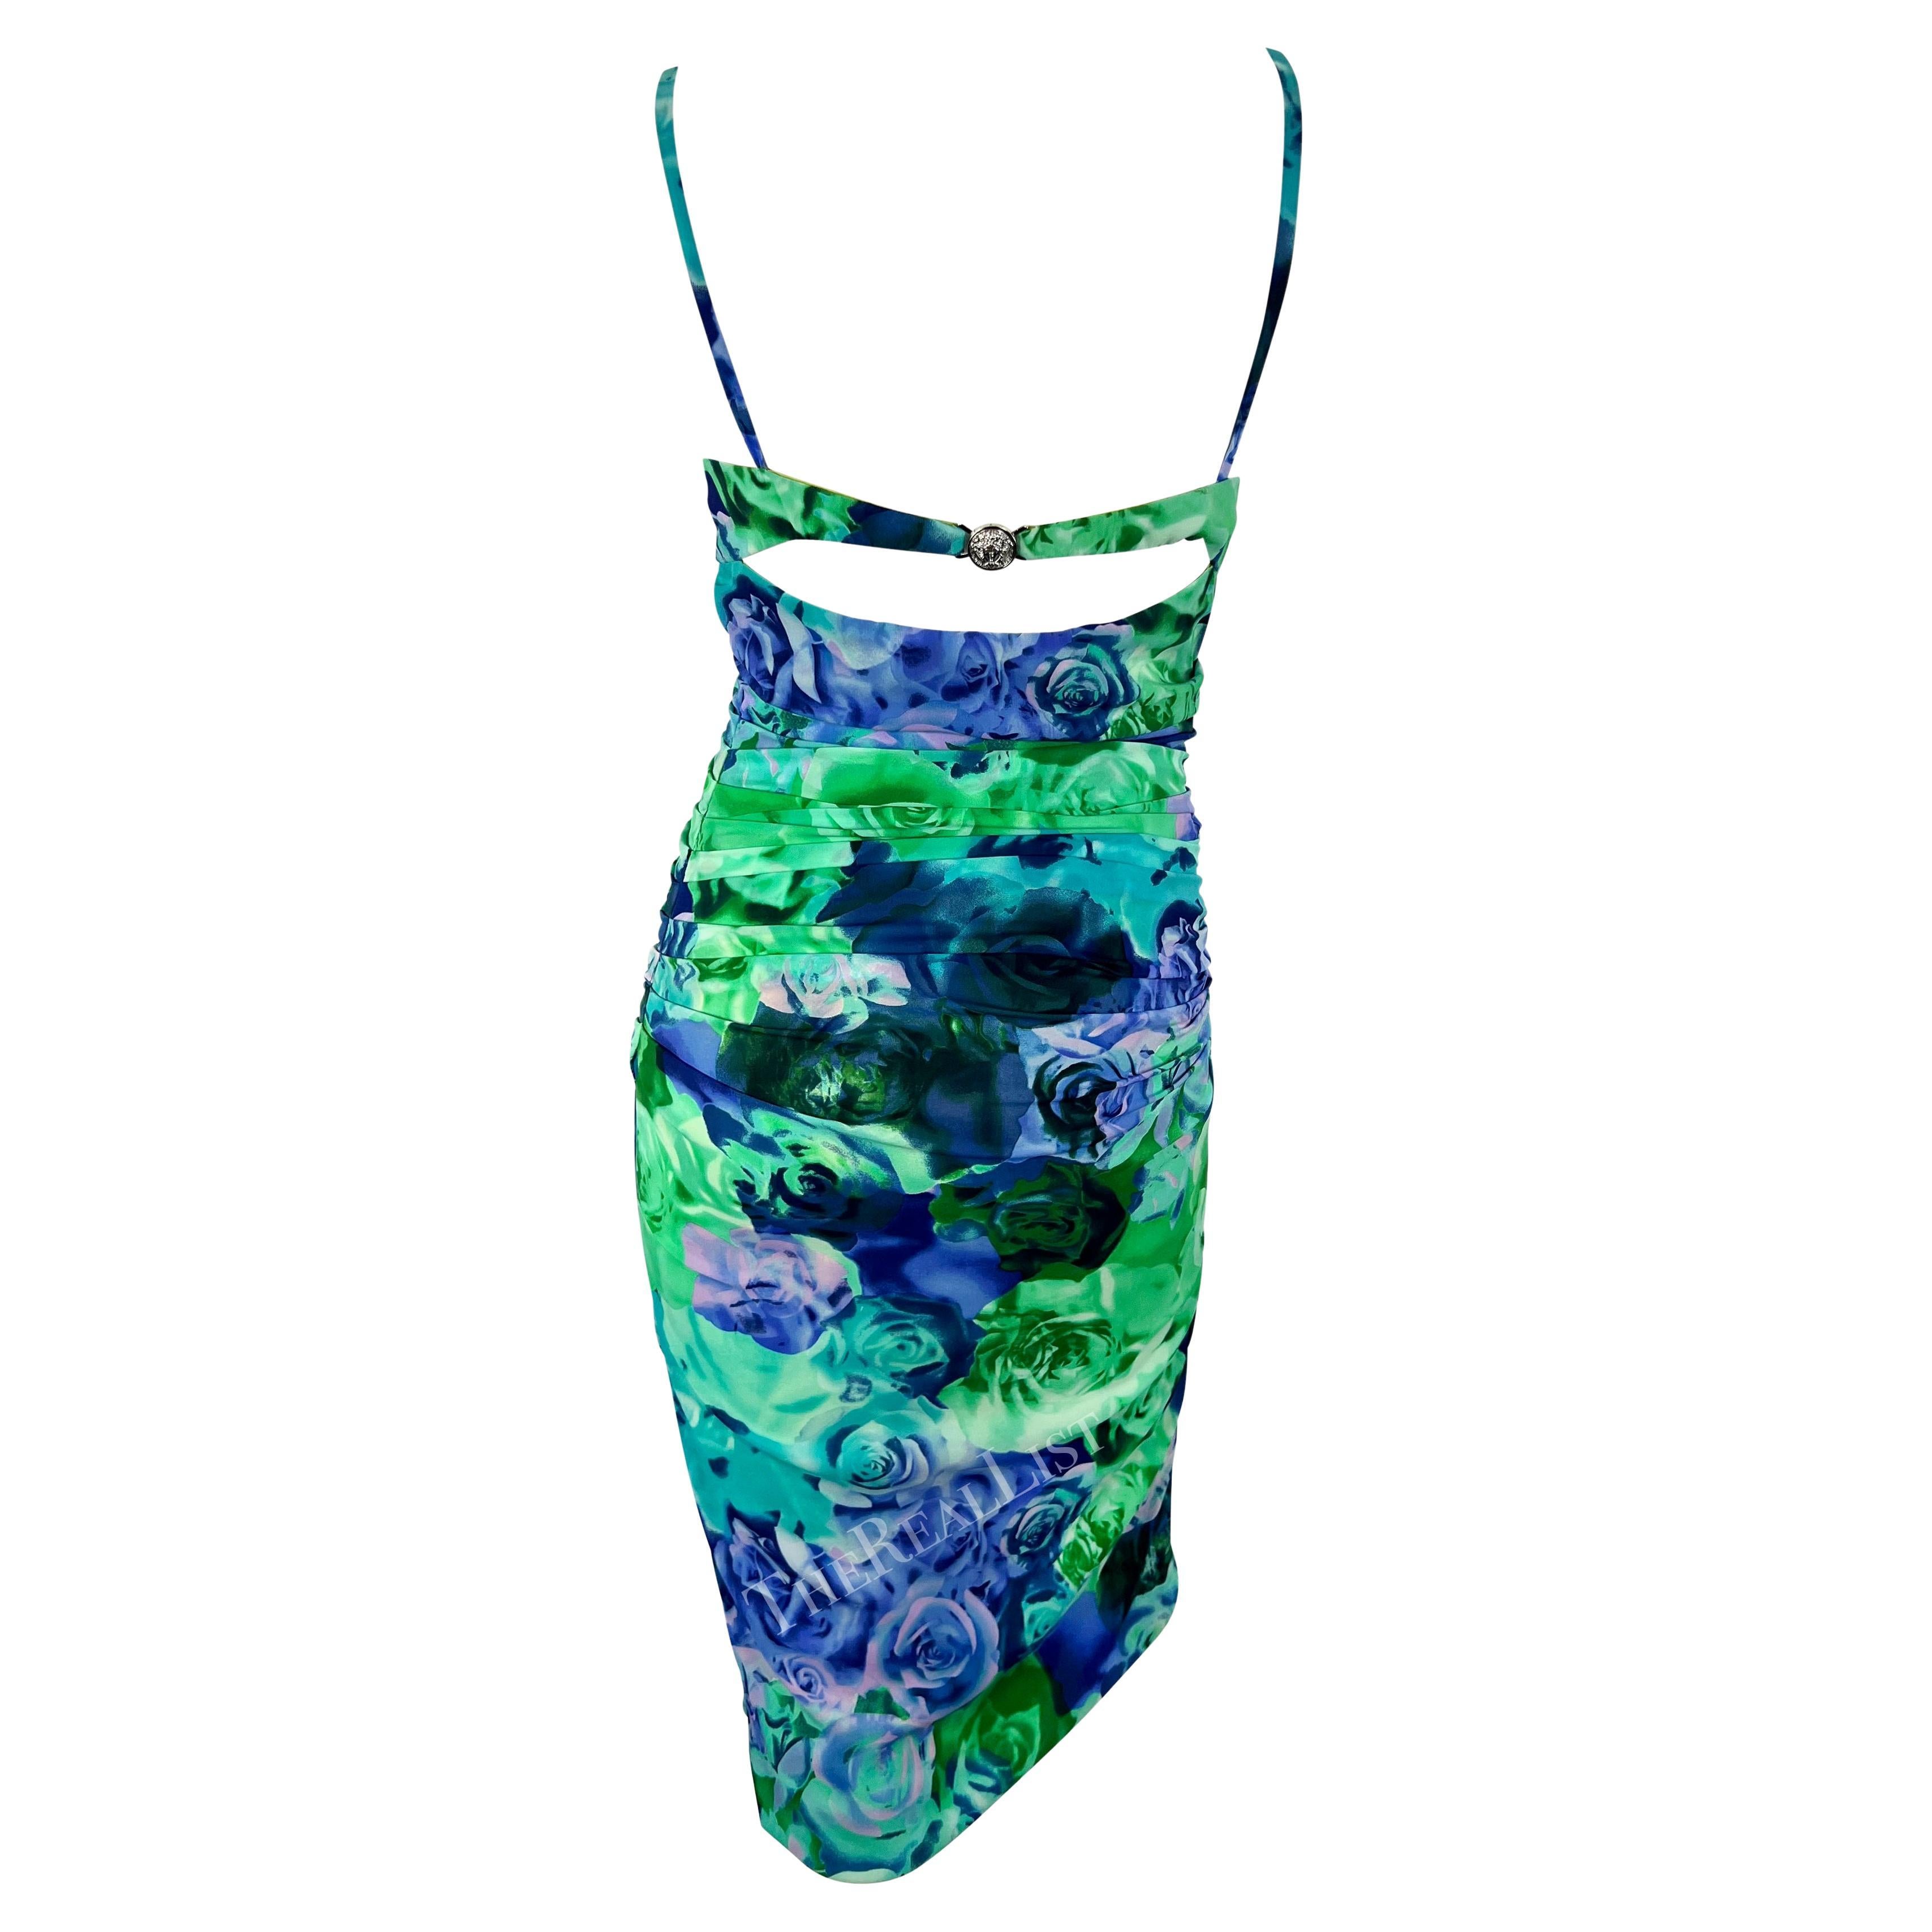 S/S 2005 Versace by Donatella Medusa Buckle Green Blue Rose Print Bodycon Dress In Excellent Condition For Sale In West Hollywood, CA